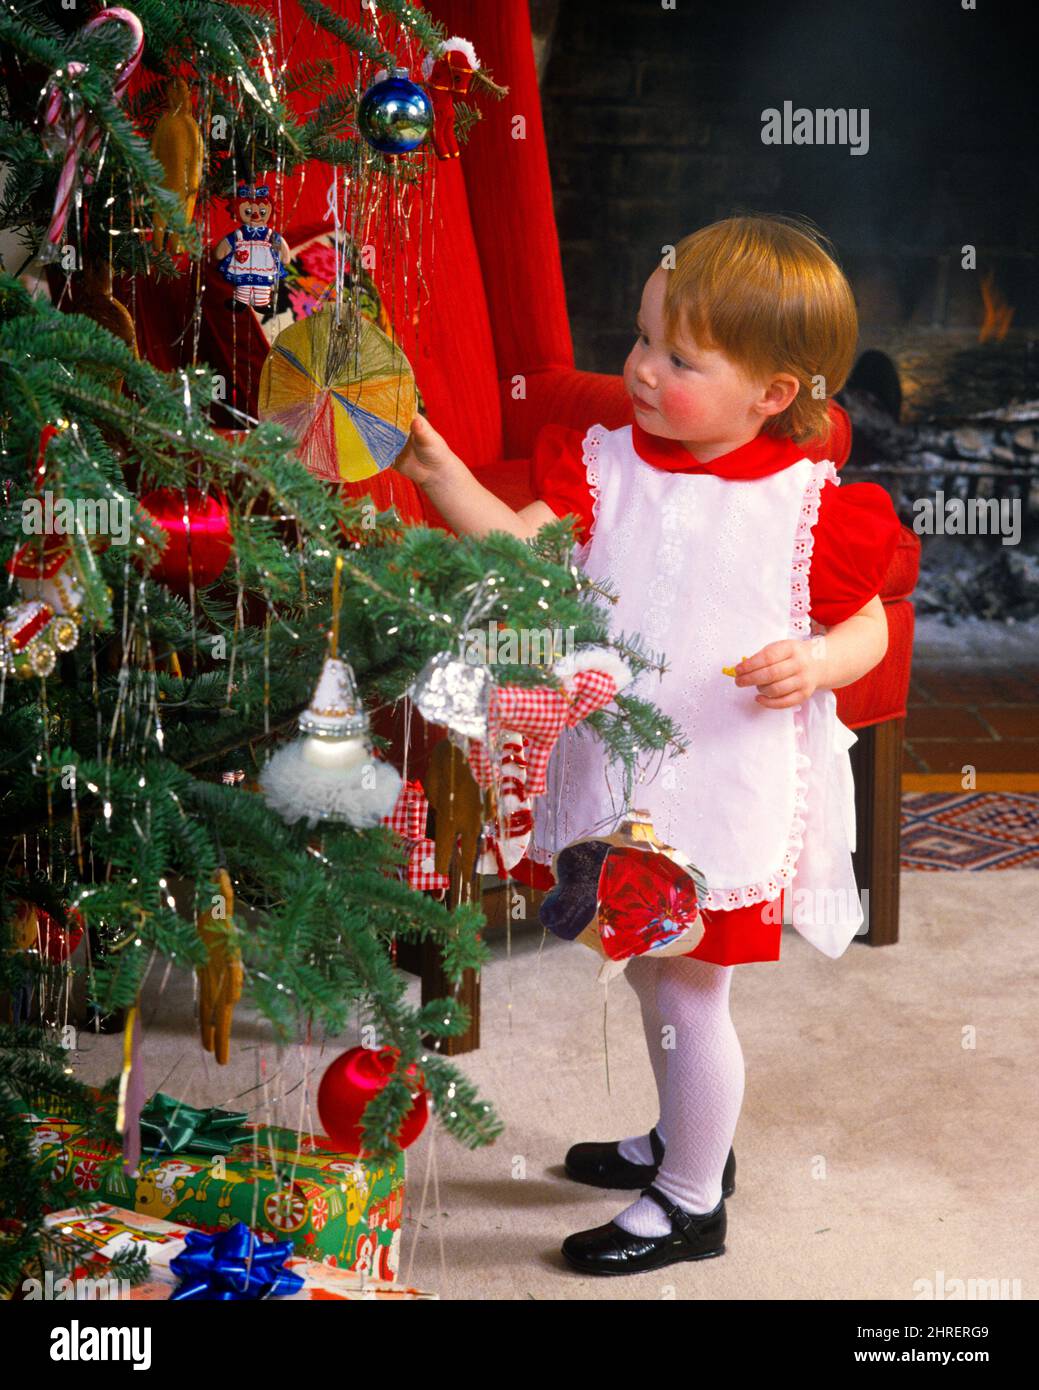 1980s LITTLE GIRL WEARING RED DRESS WHITE PINAFORE MARY JANE PATENT LEATHER SHOES FOCUSED ON ORNAMENT ON CHRISTMAS TREE  - kx8839 PHT001 HARS JUVENILE CUTE STYLE MYSTERY DECORATIONS JOY LIFESTYLE CELEBRATION FEMALES HOME LIFE COPY SPACE FULL-LENGTH INSPIRATION ORNAMENT SPIRITUALITY MARY PATENT DREAMS HAPPINESS DISCOVERY MERRY REDHEAD DECEMBER RED HAIR CONCEPTUAL DECEMBER 25 CURIOUS STYLISH PINAFORE FOCUSED GROWTH JANE JOYOUS JUVENILES MARY JANE SHOES BABY GIRL CAUCASIAN ETHNICITY INQUISITIVE OLD FASHIONED Stock Photo